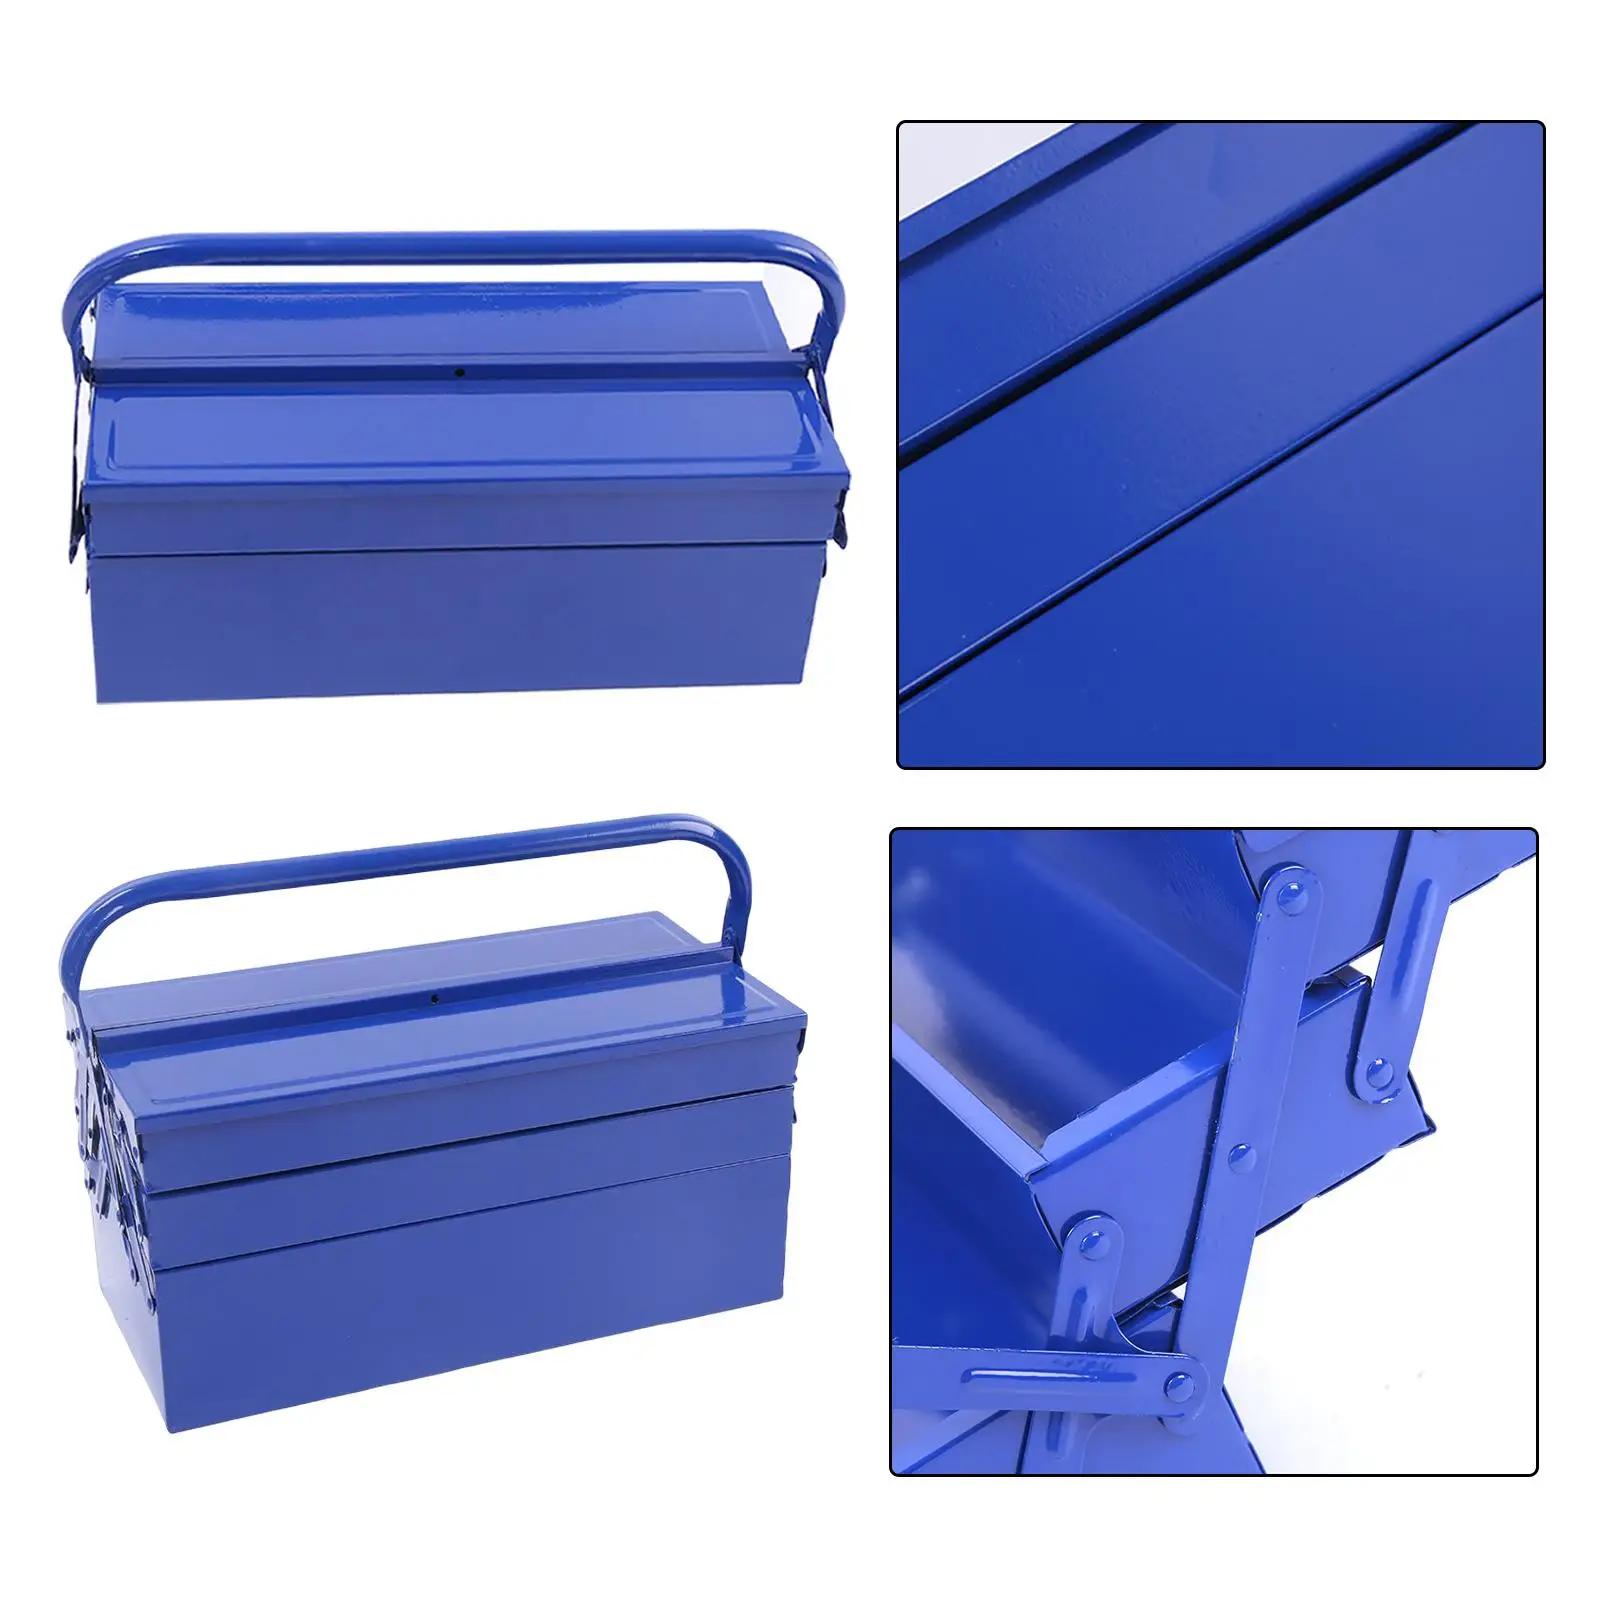 Portable Tool Box Durable with Handle Screw and Nuts Compartment Tray Drawer Repair Tool Storage Case for Garage Trunk